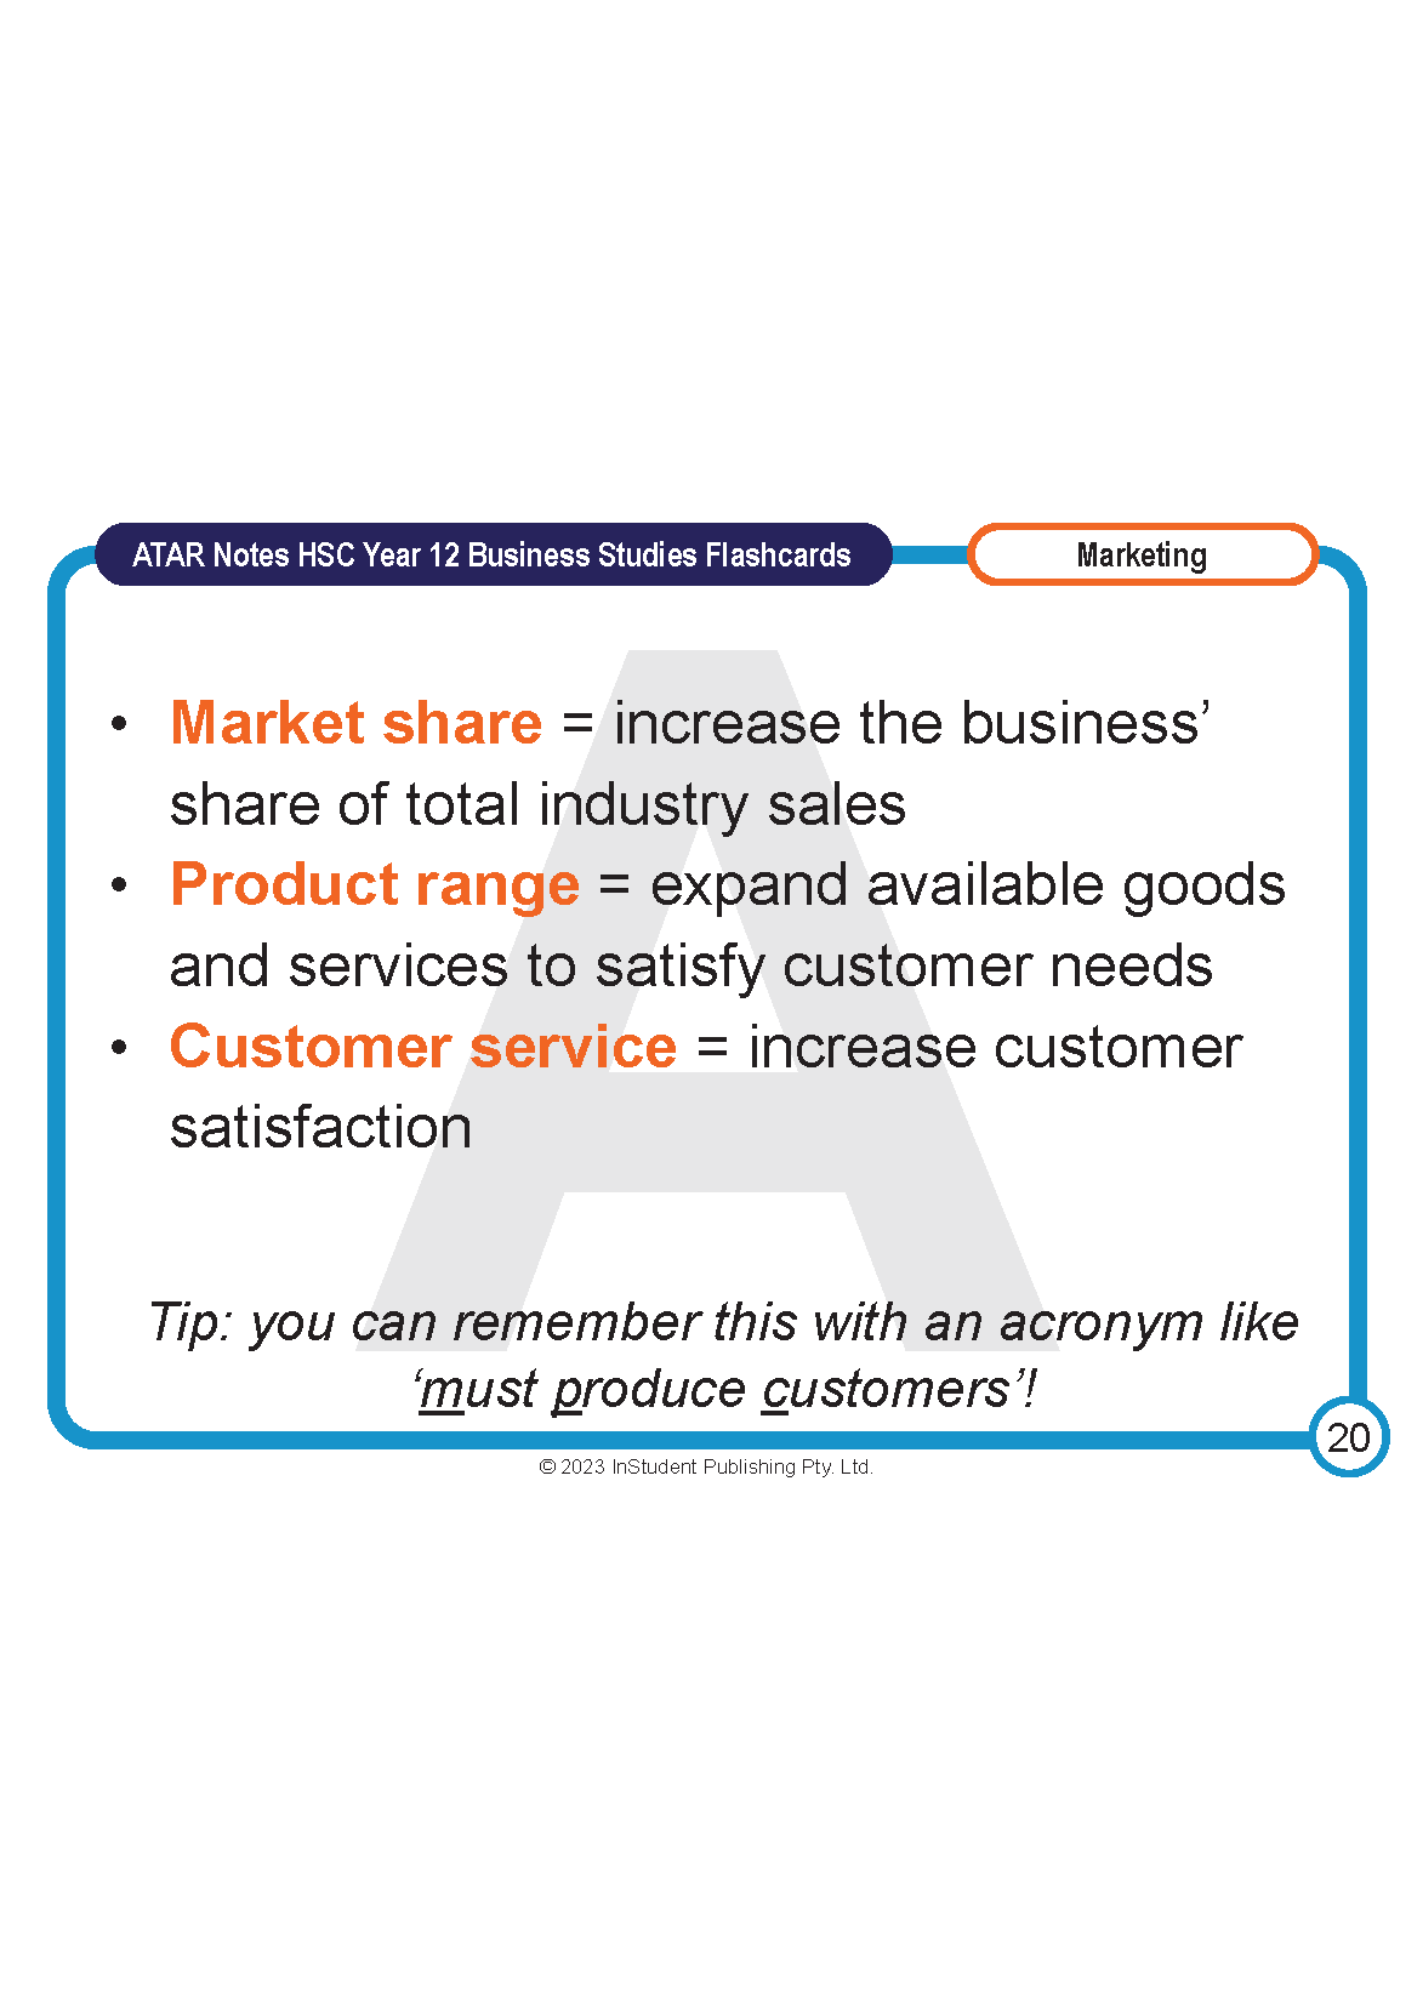 ATAR Notes Flashcards: HSC Year 12 Business Studies